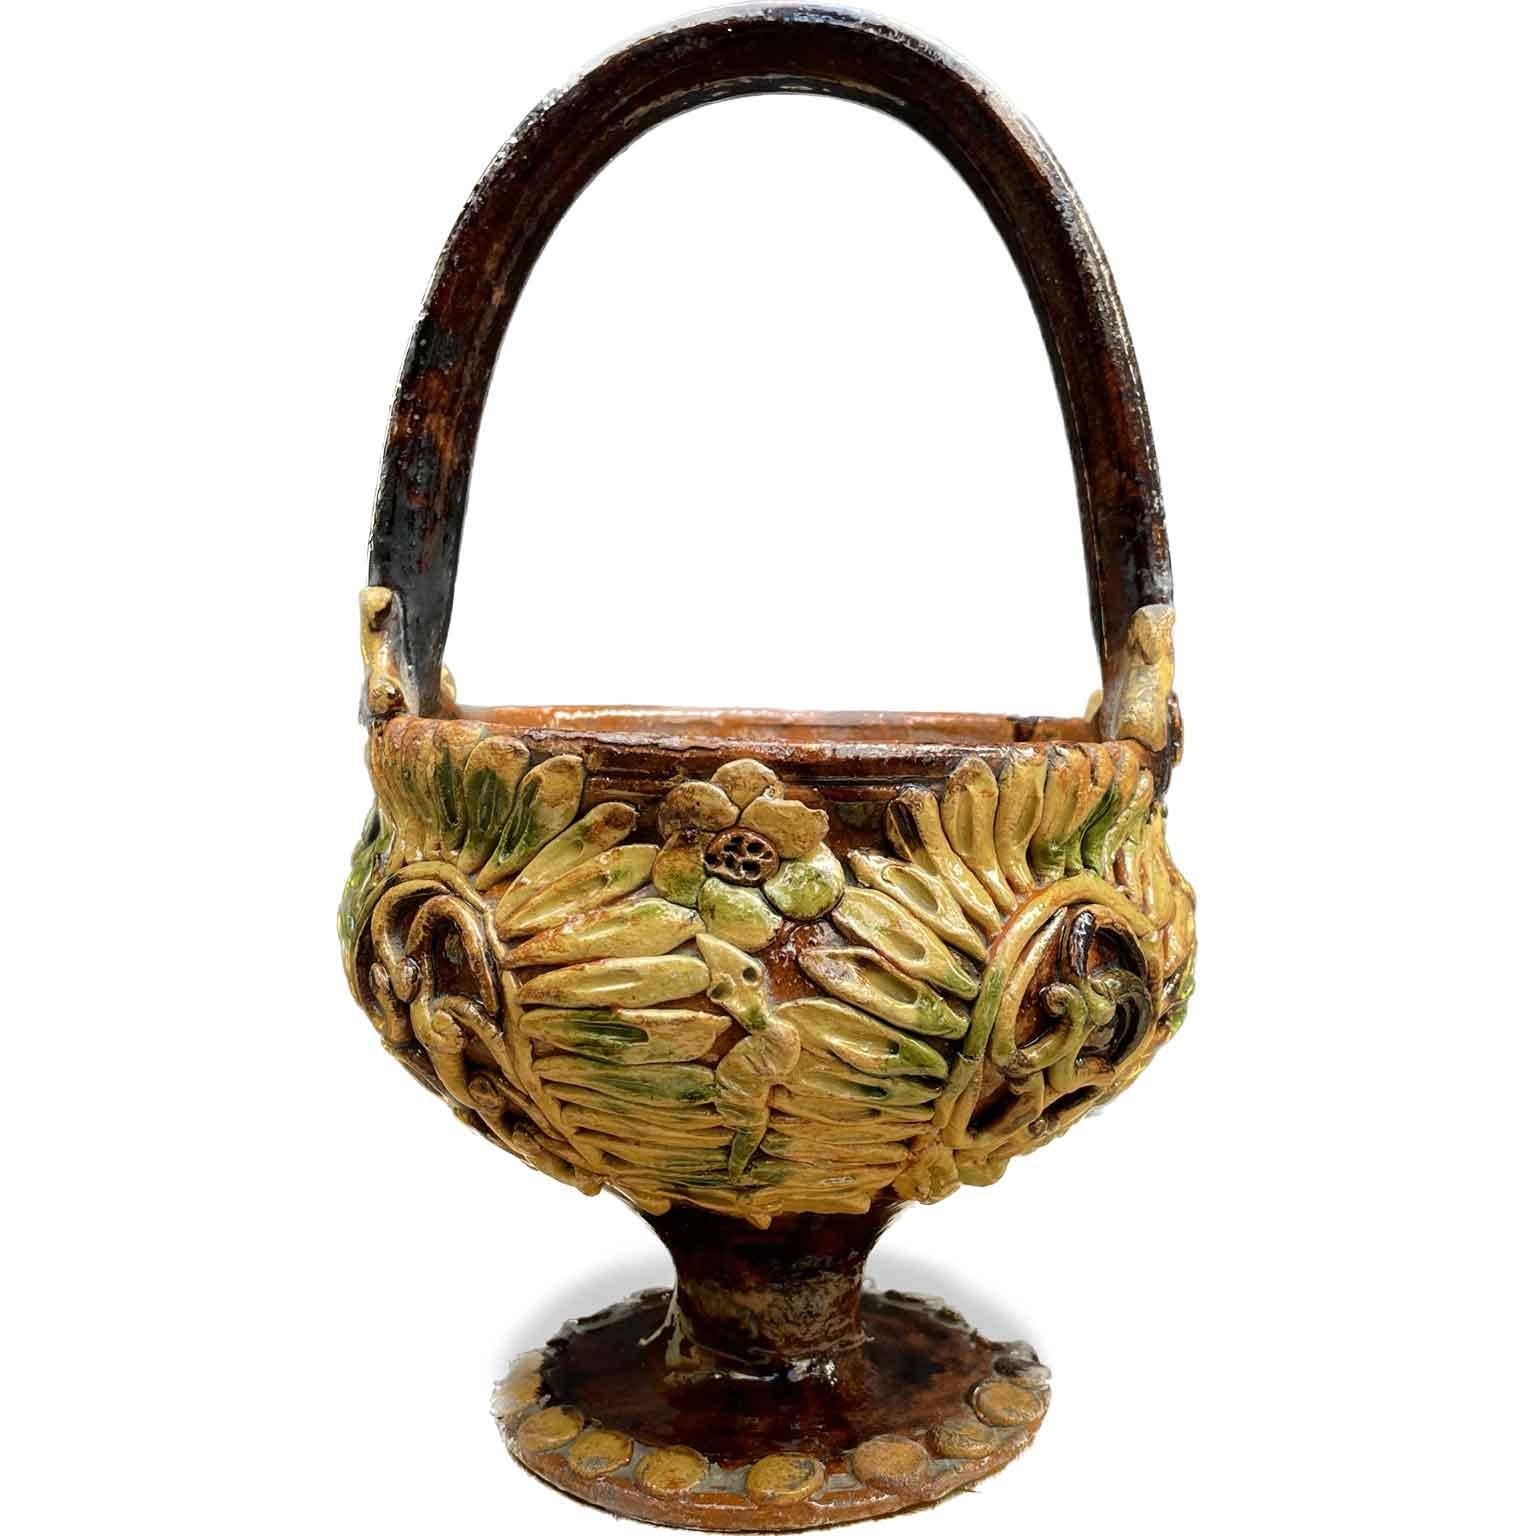 19th Century Italian Terracotta Handled Warmer Vase with Flowers from Tuscany For Sale 1